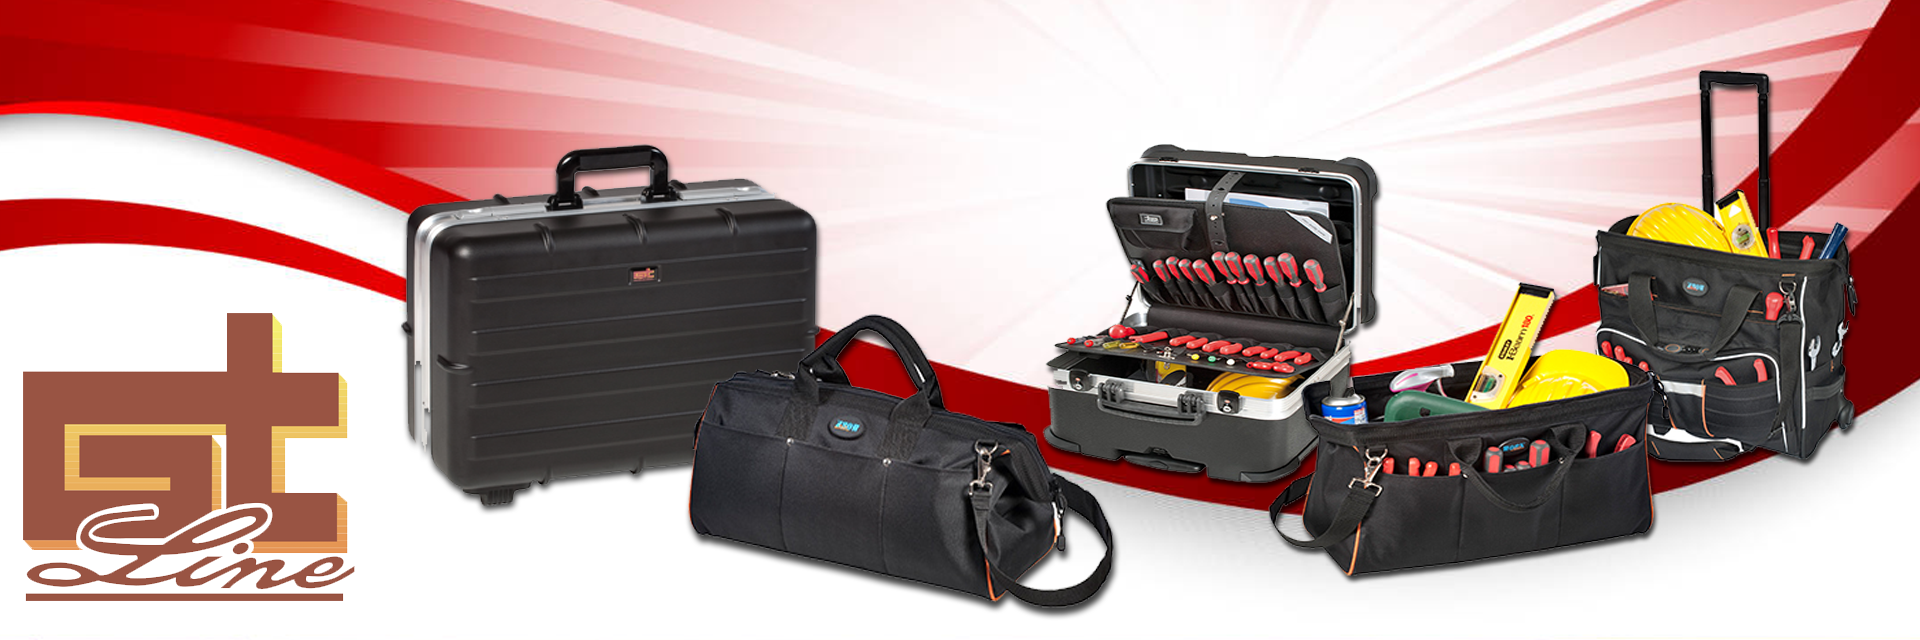 GT Tool - Tool Storage Products